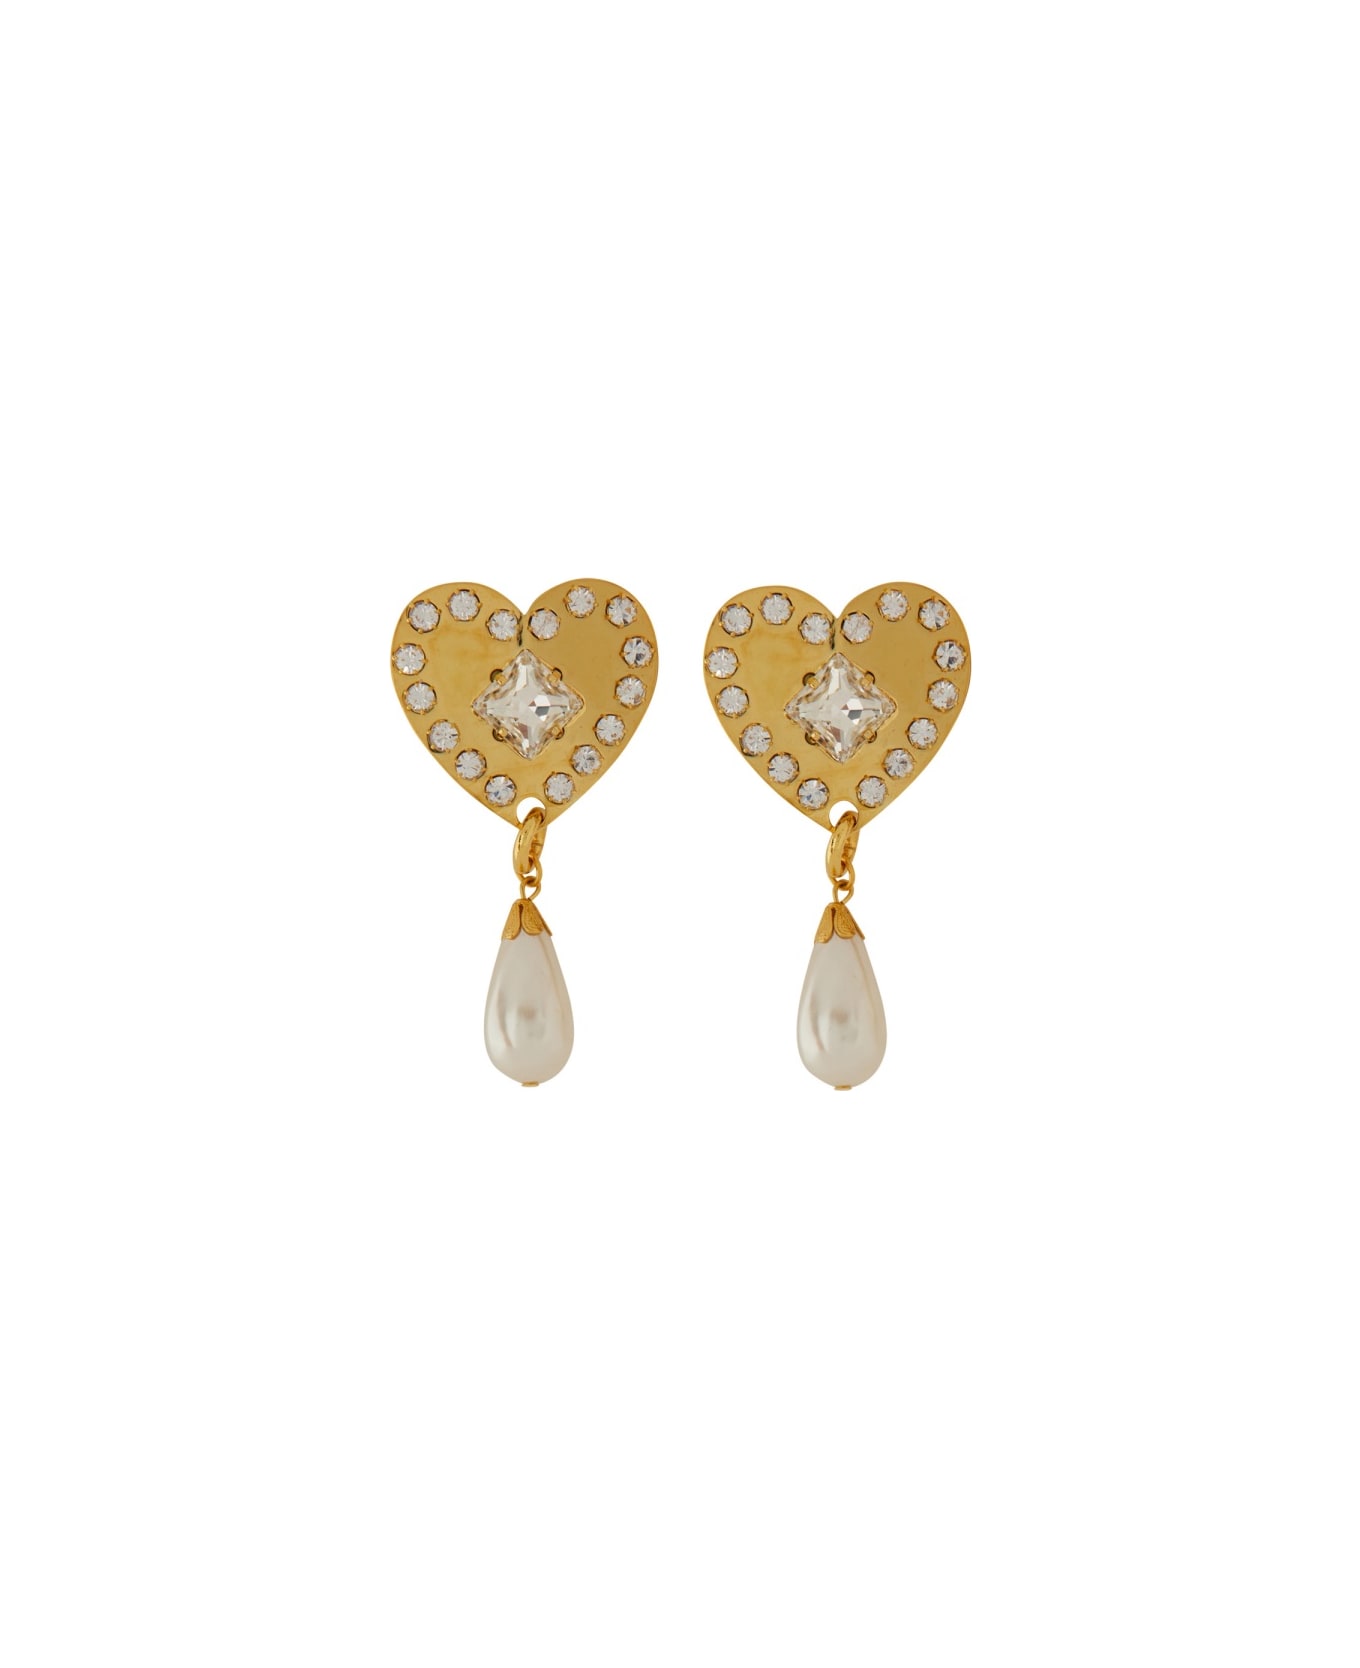 Alessandra Rich Metal Heart Earrings With Crystals - Cry gold